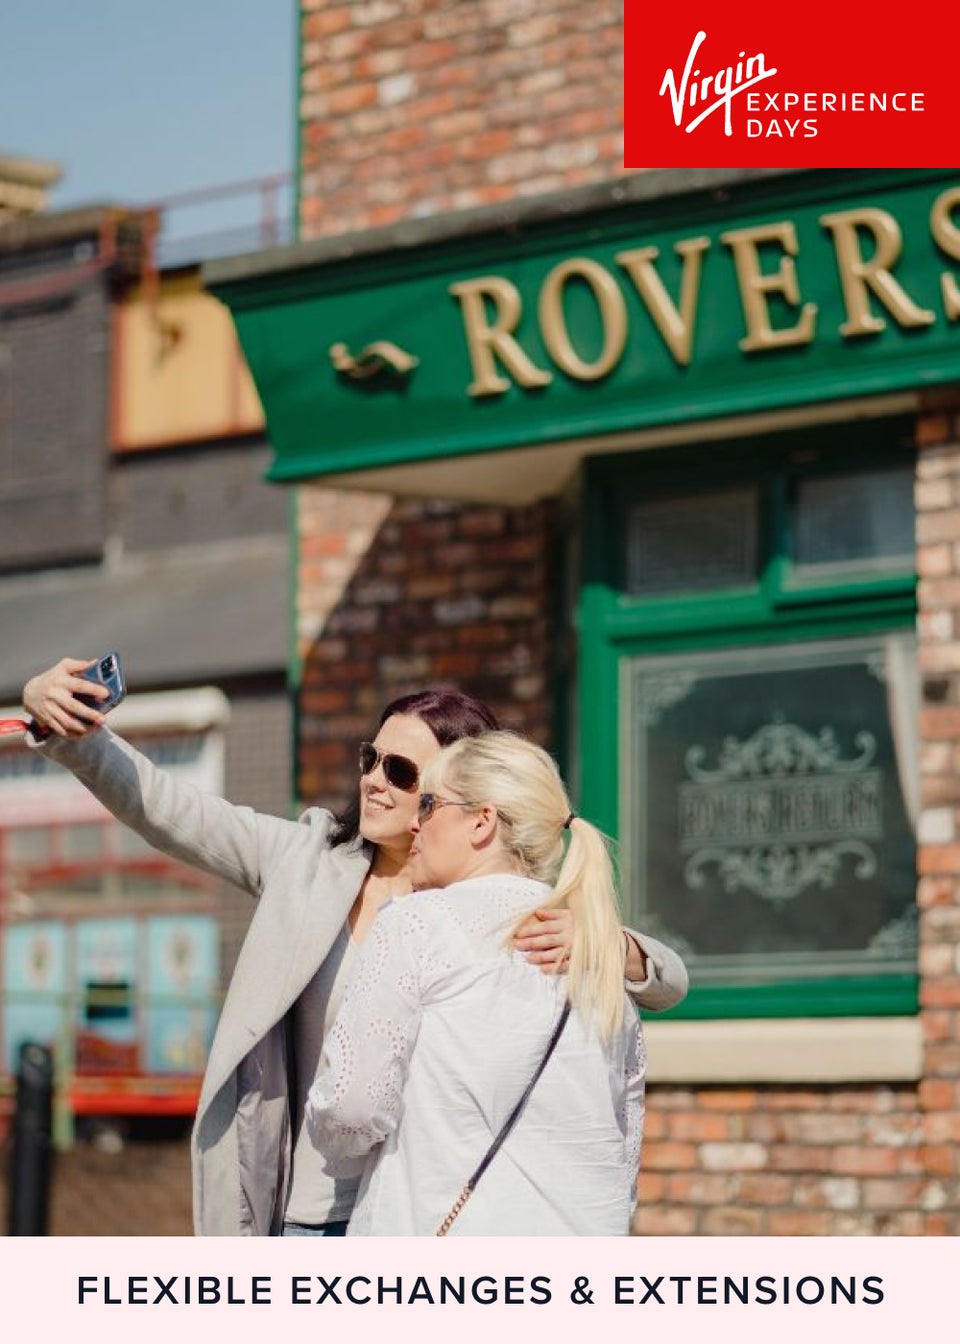 Virgin Experience Days Coronation Street: The Tour for Two